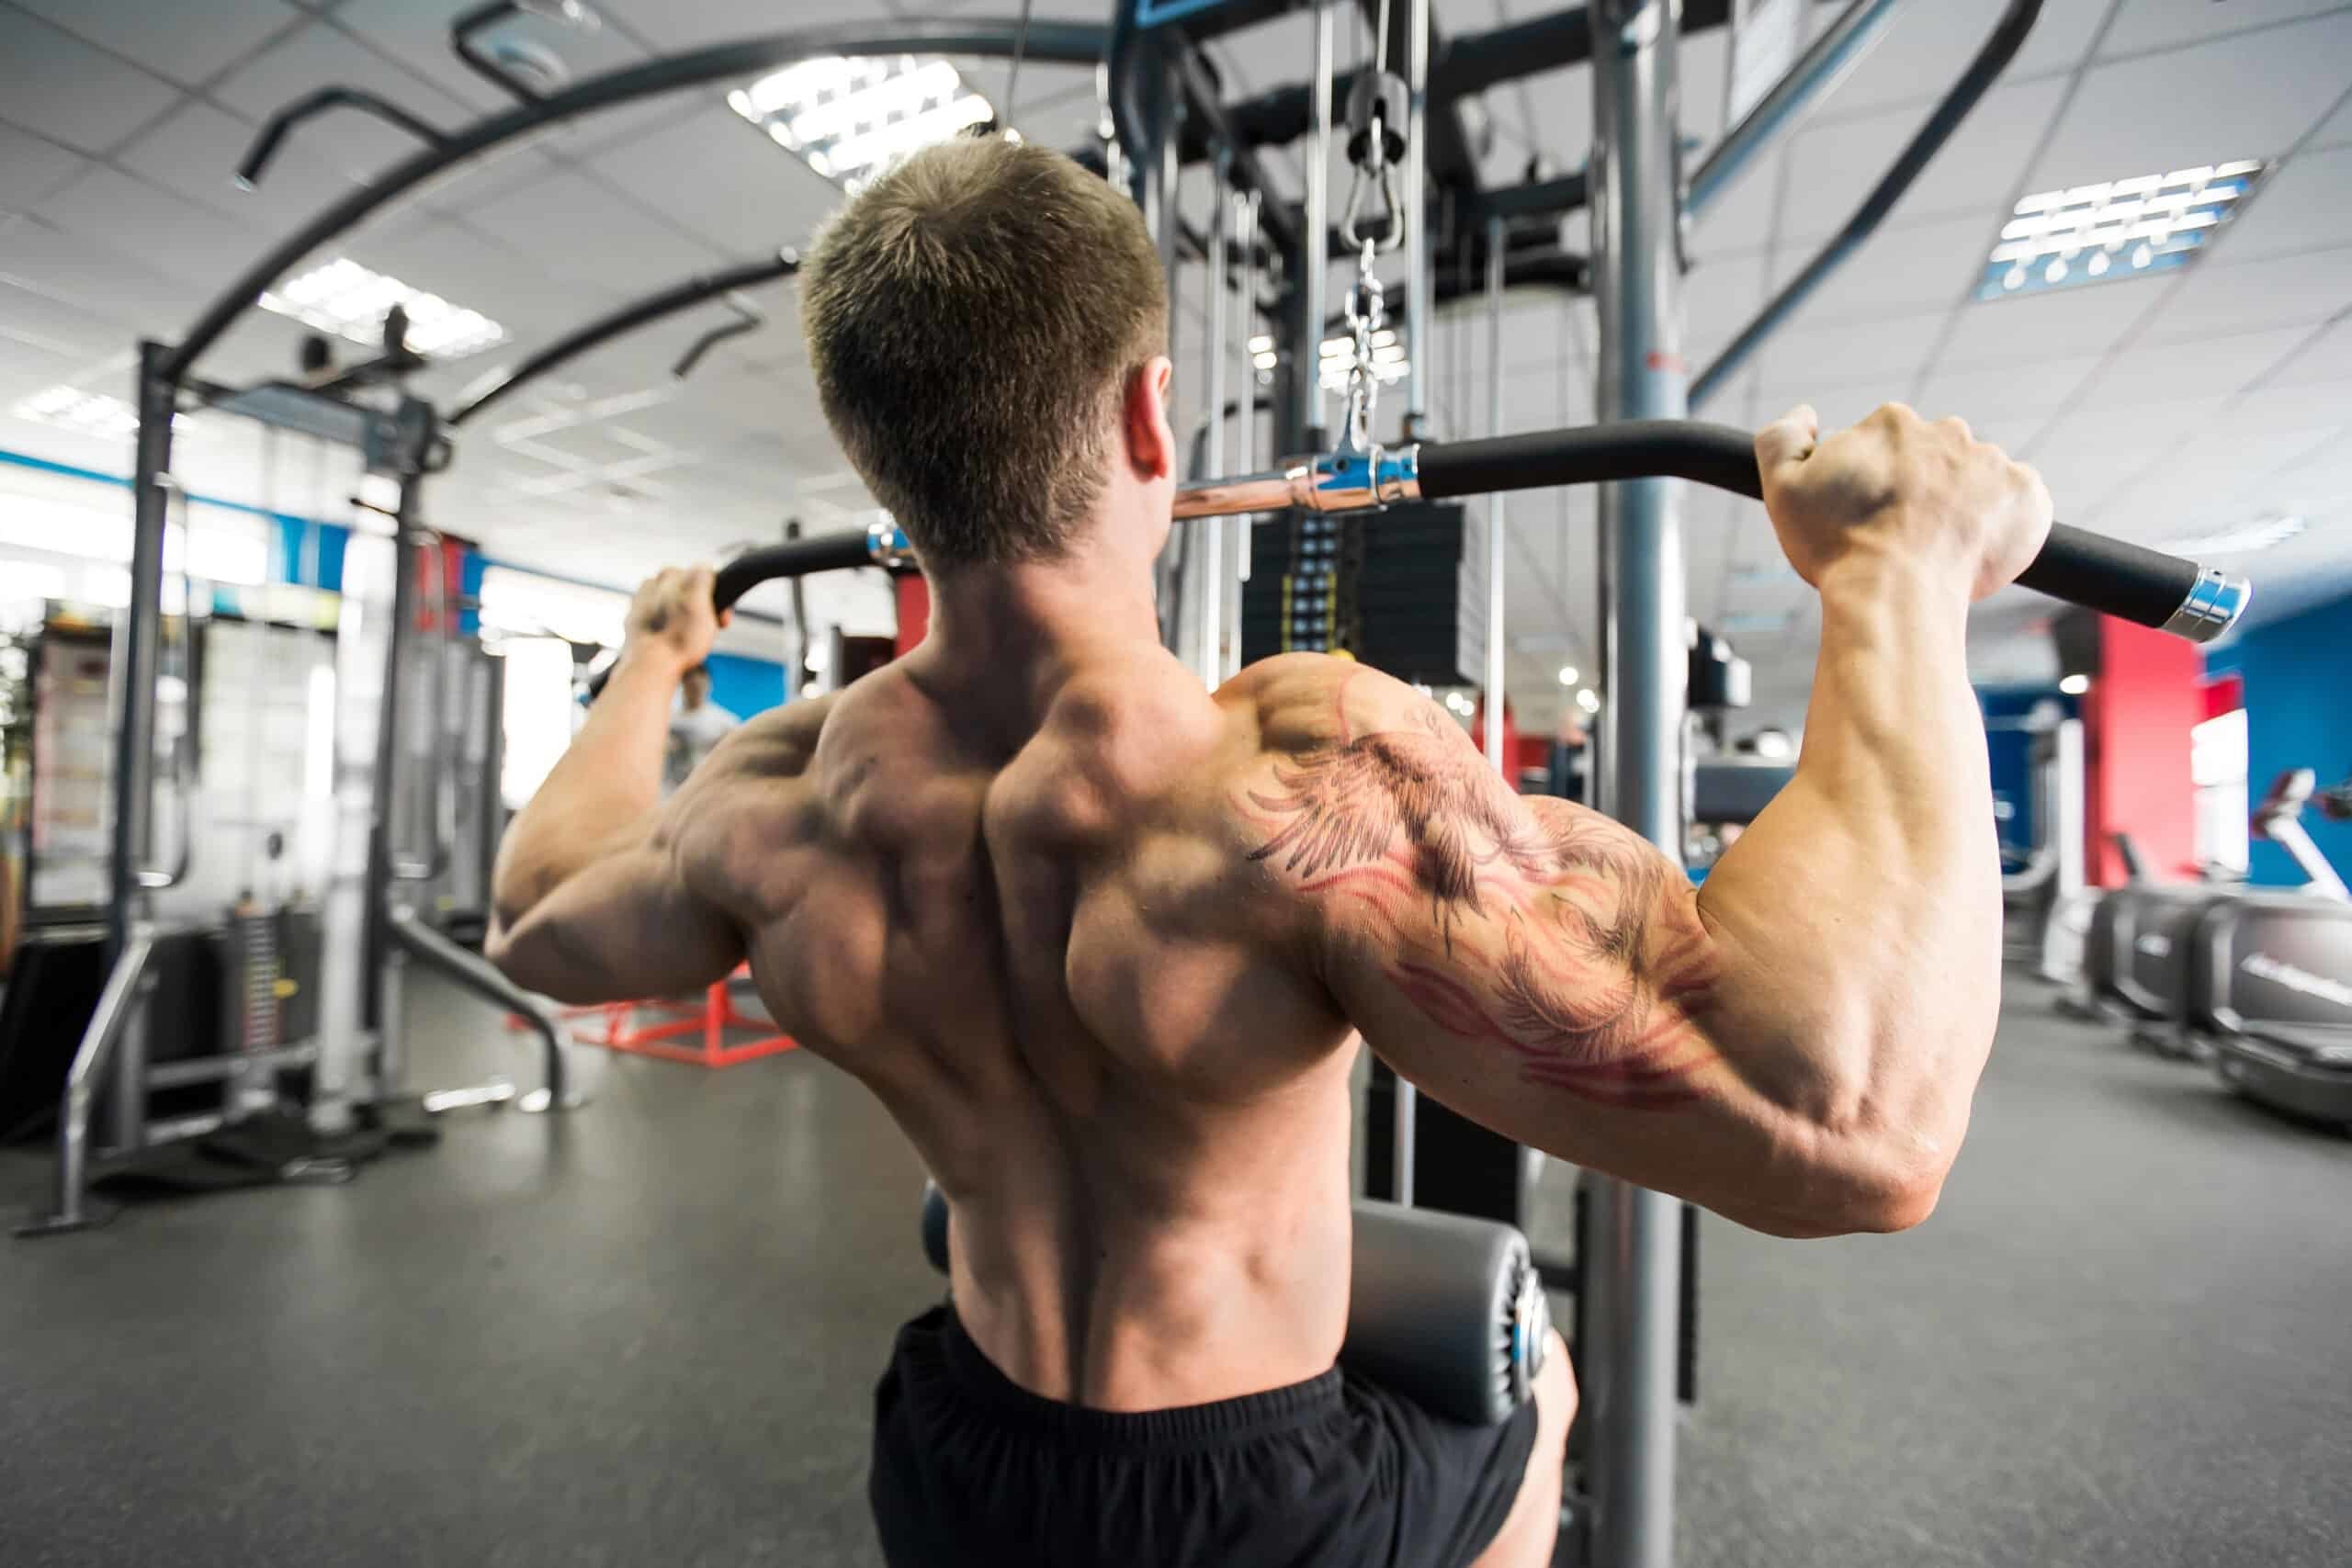 wasserette Misbruik Voor u Master the Lat Pulldown Exercise for a Strong Back